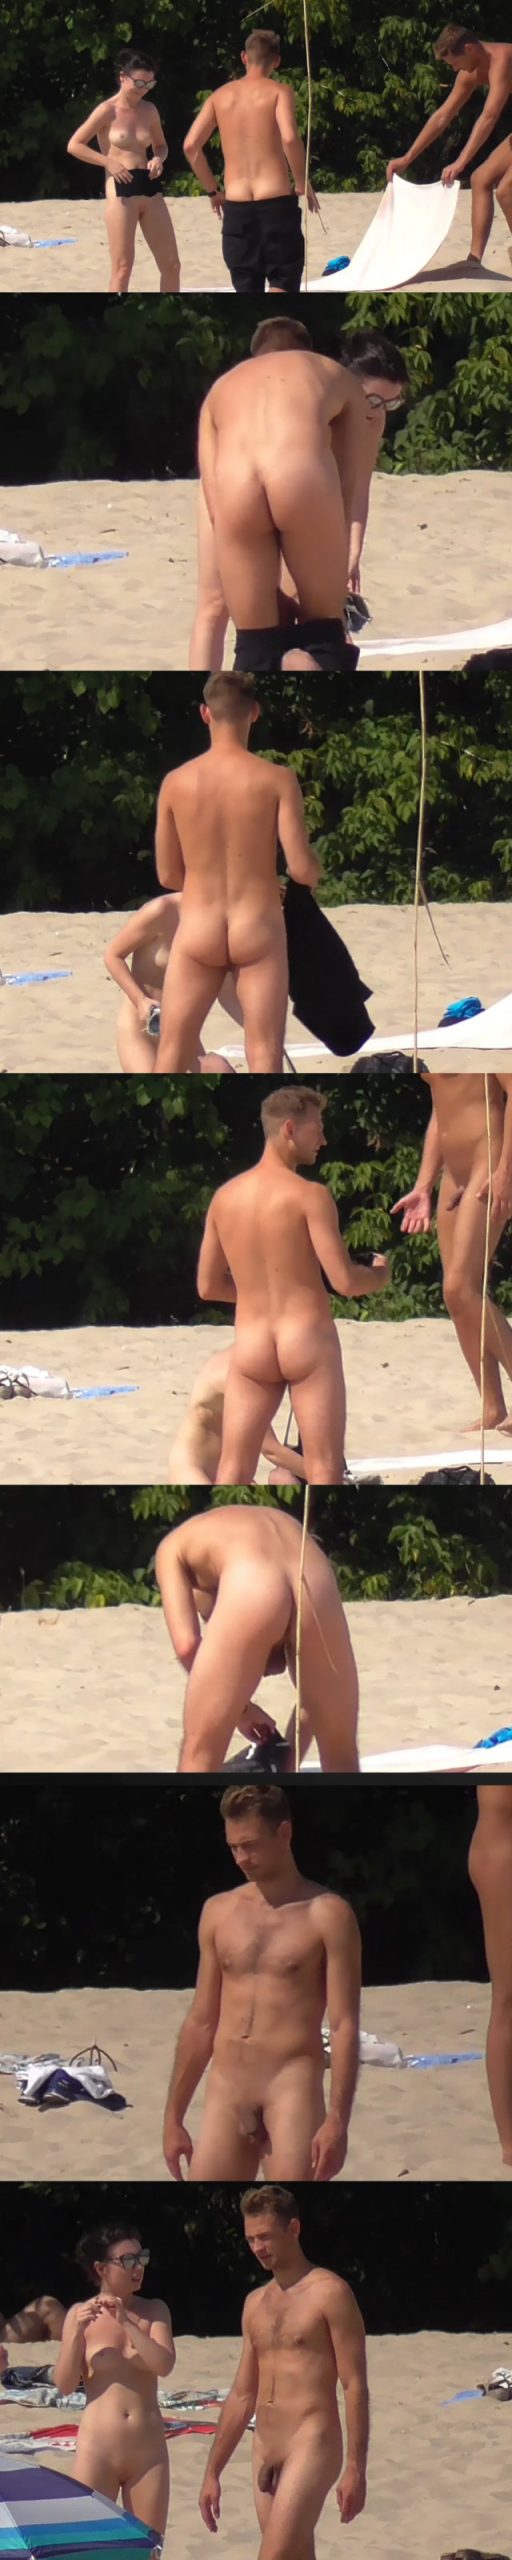 straight nudist guy stripping naked at the beach